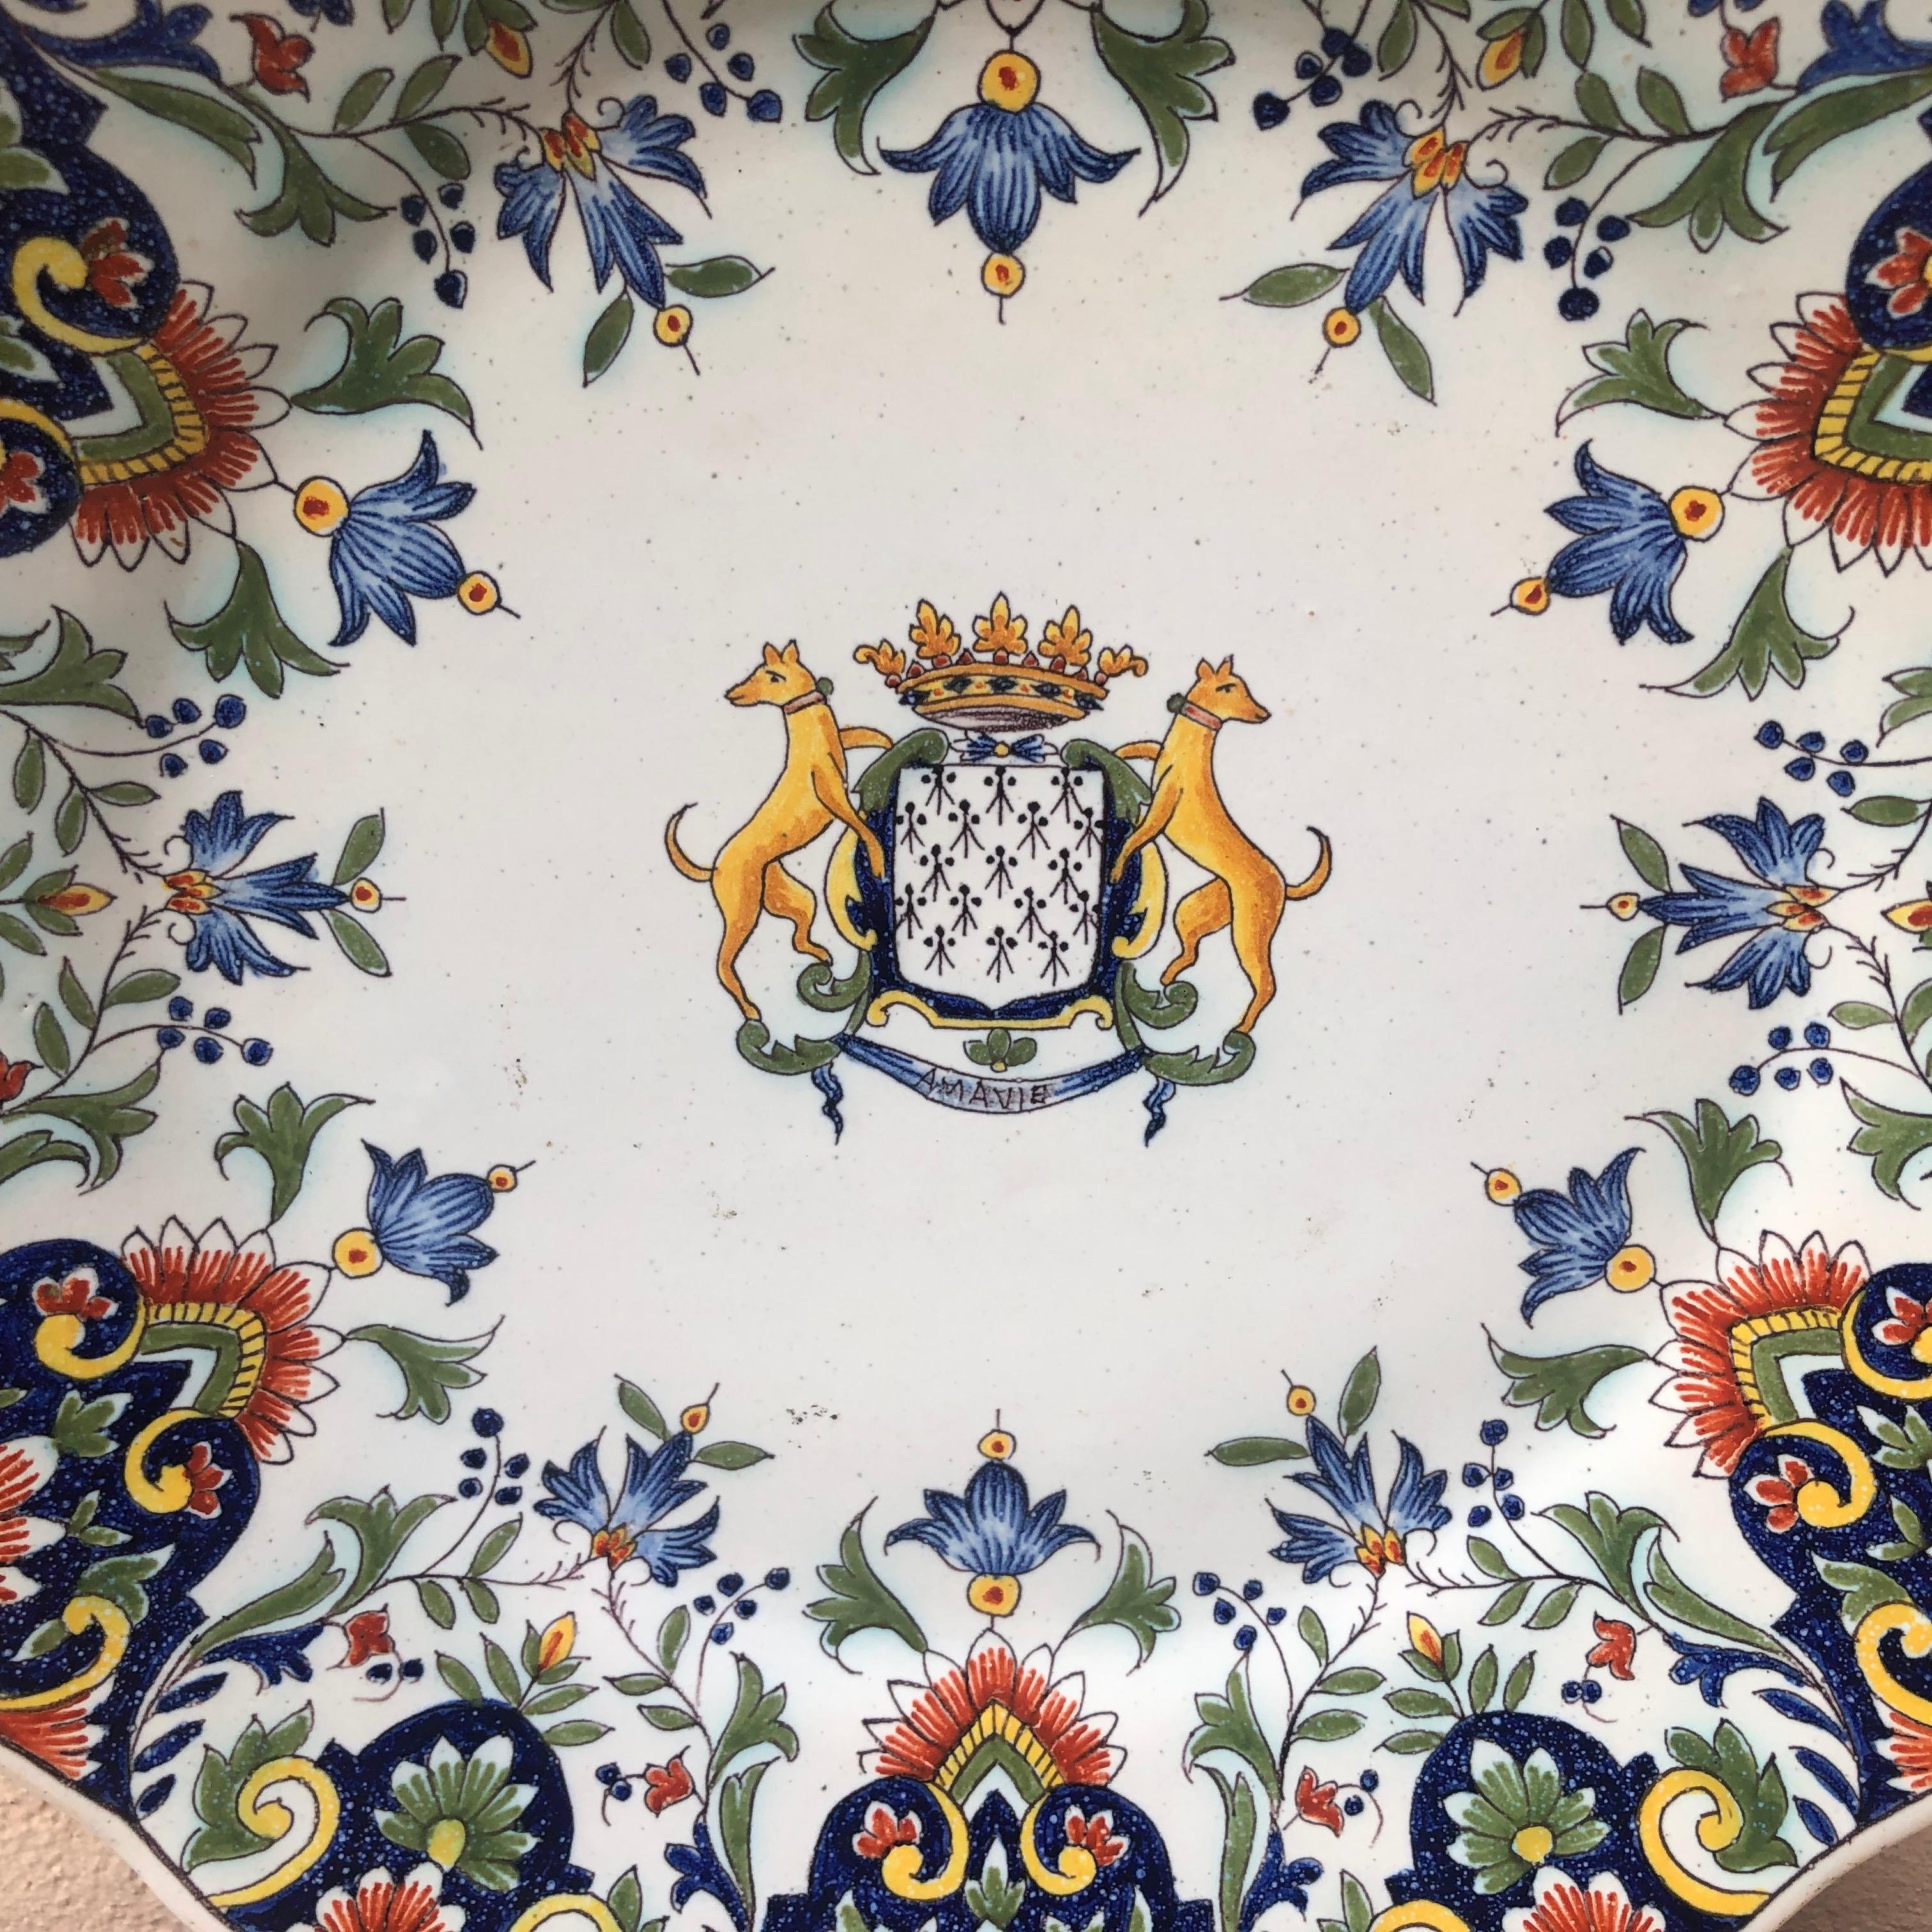 A French faience plate with a coat of arms and rich floral border signed Fourmaintraux Desvres, circa 1890.